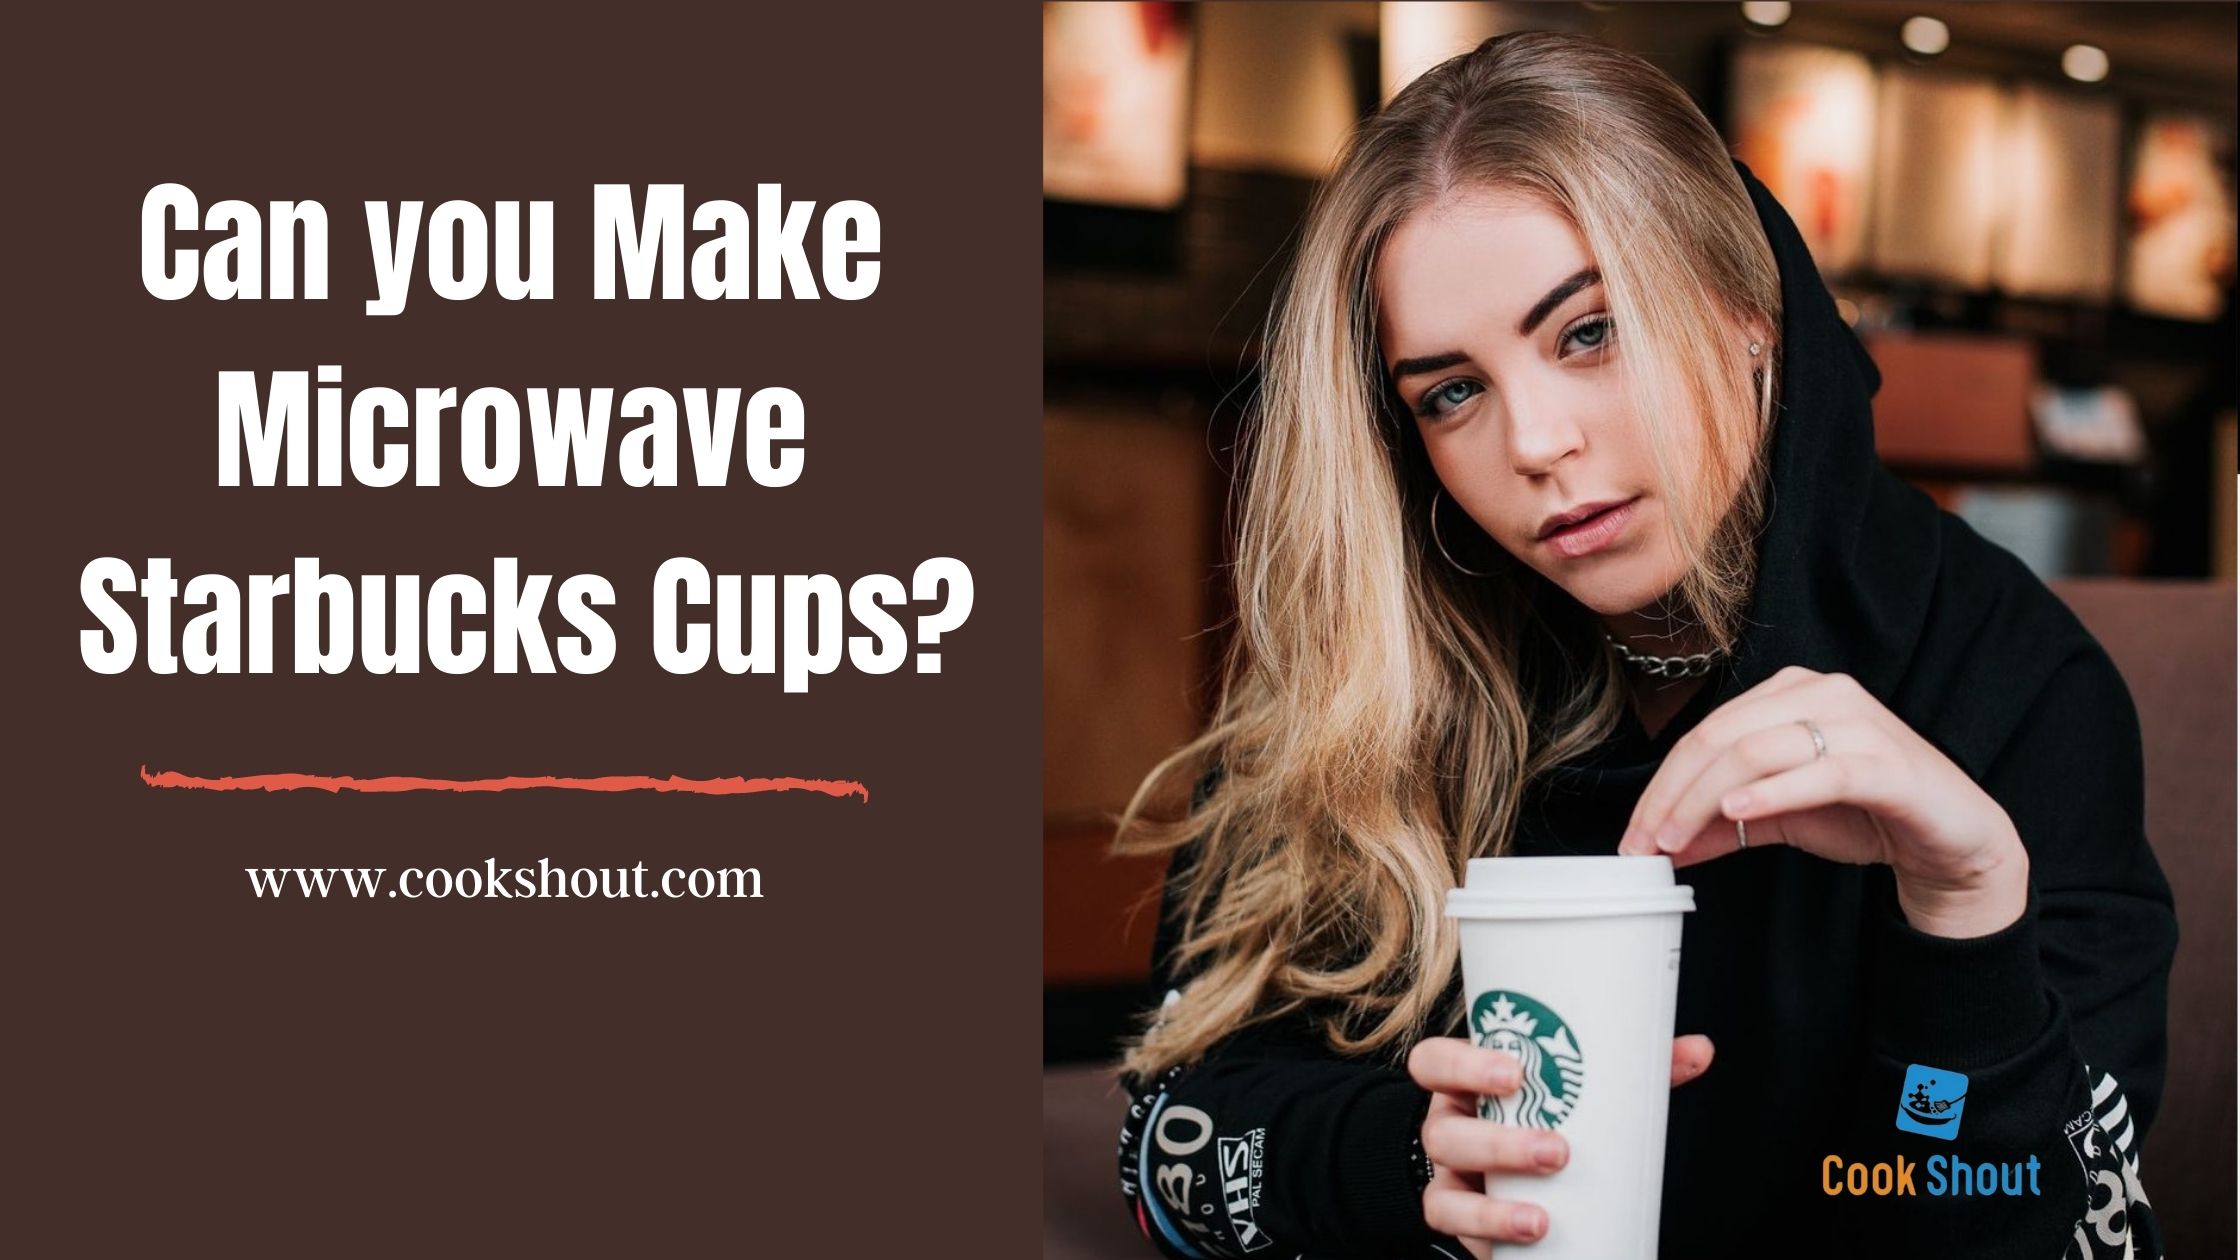 Can you Make Microwave Starbucks Cups